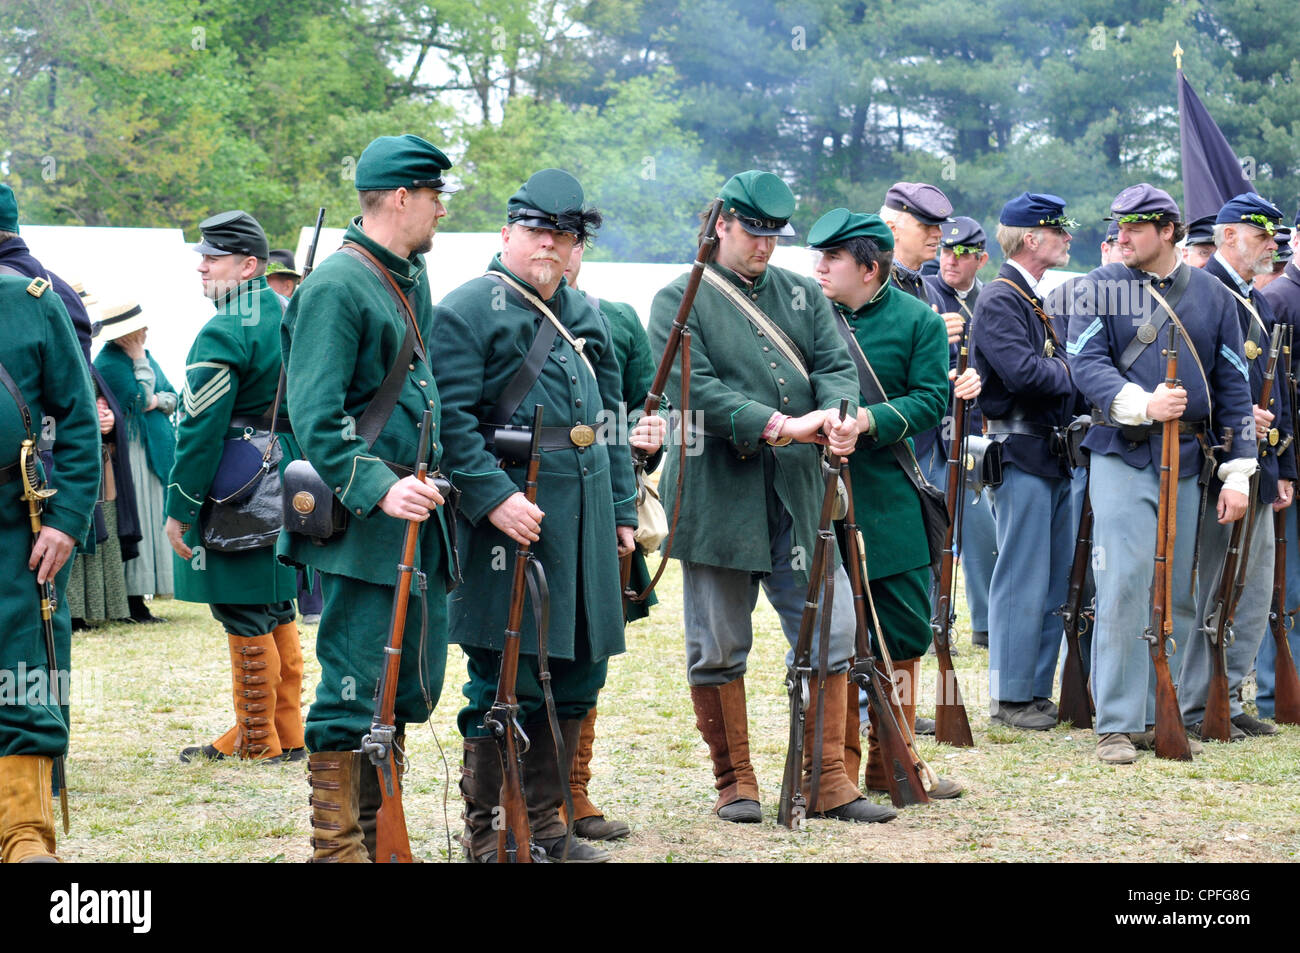 Group of Union Army soldiers before drawn up in battle formation, Civil War reenactment, Bensalem, Pennsylvania, USA Stock Photo